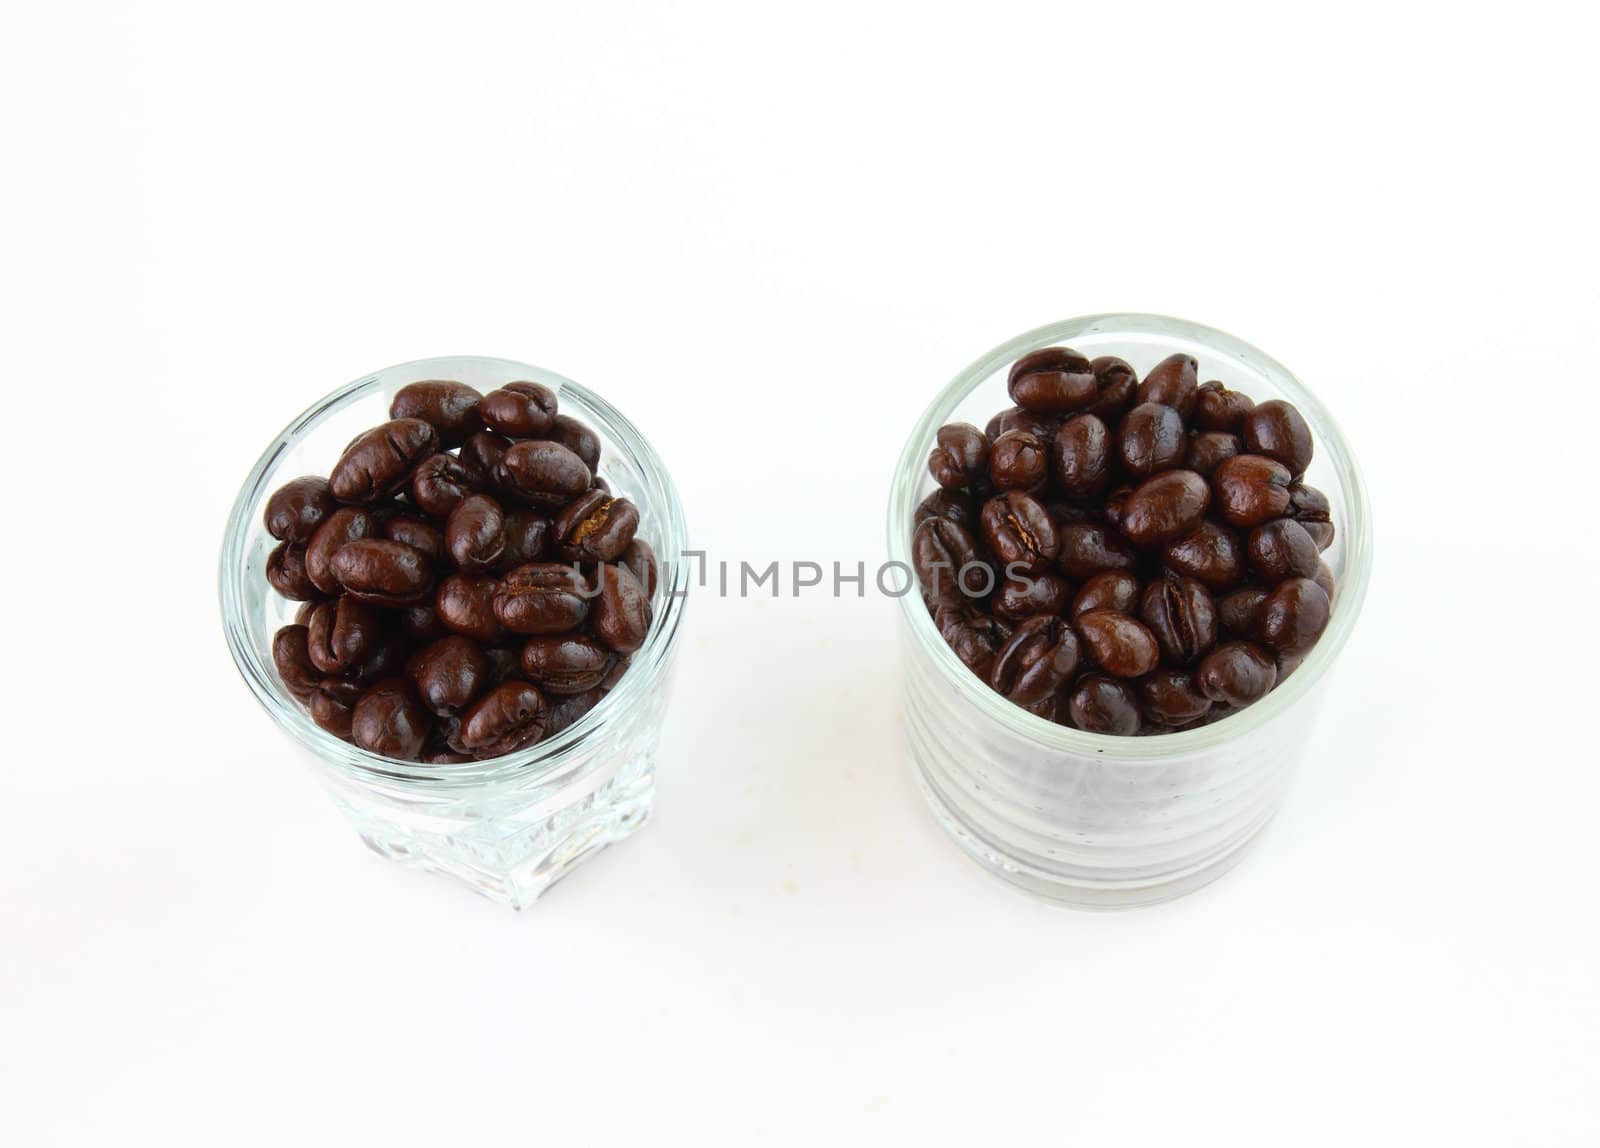 Coffee beans in glasses on white background